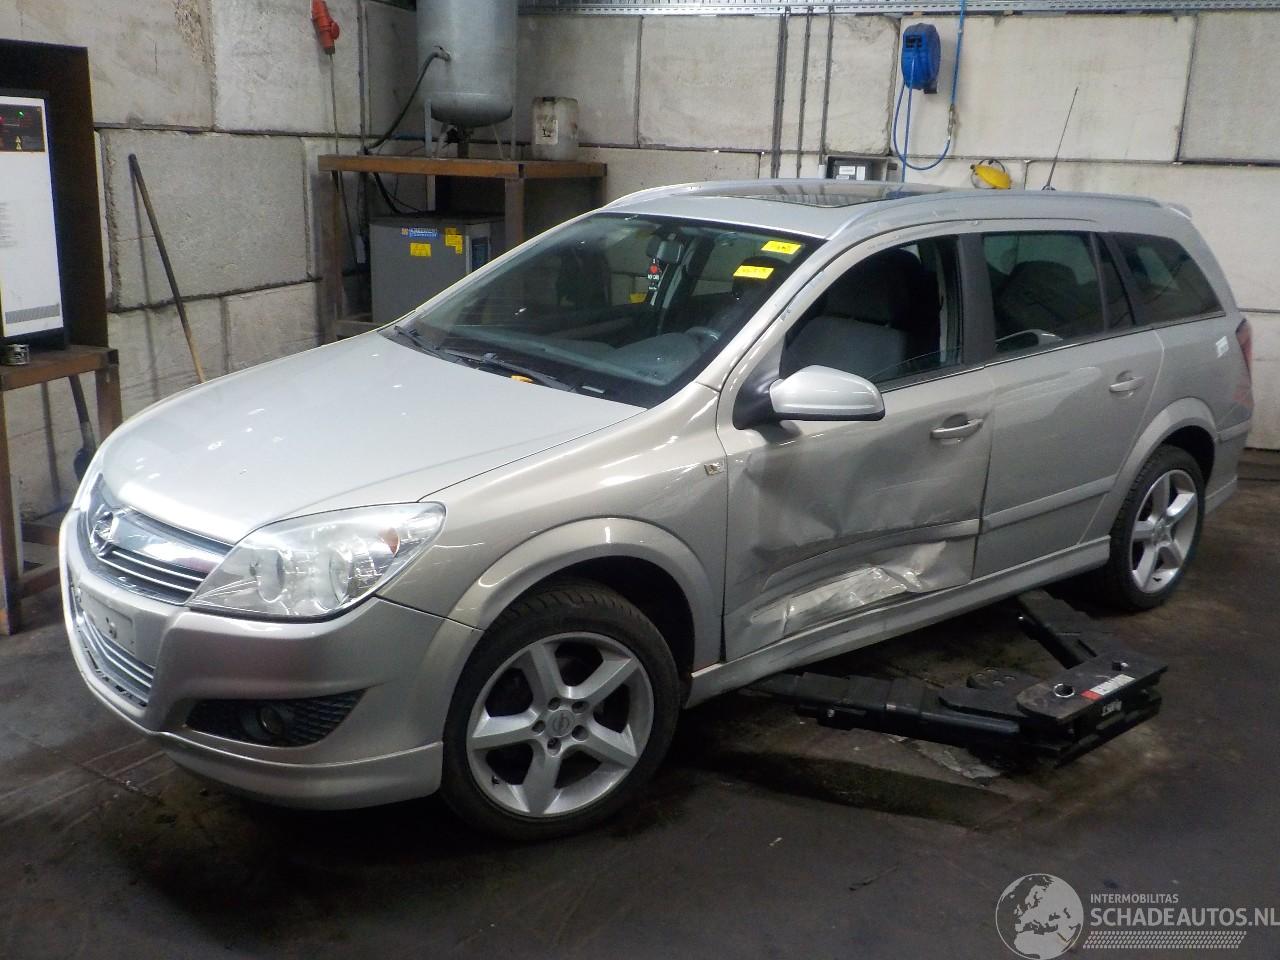 Opel Astra Astra H SW (L35) Combi 1.8 16V (Z18XER(Euro 4)) [103kW]  (08-2005/05-2=
014)